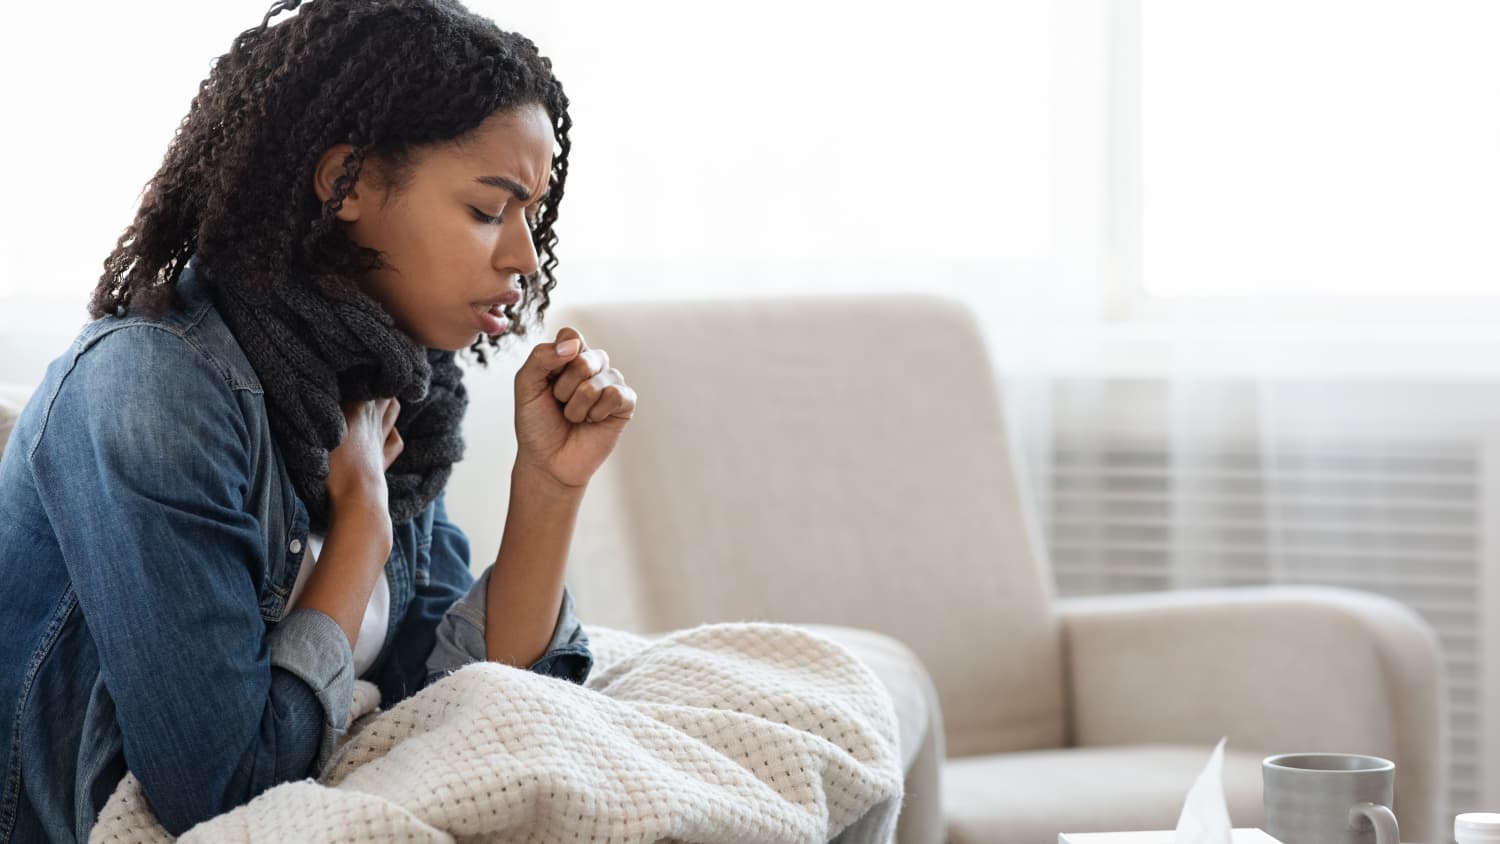 young woman with walking pneumonia on a couch coughing